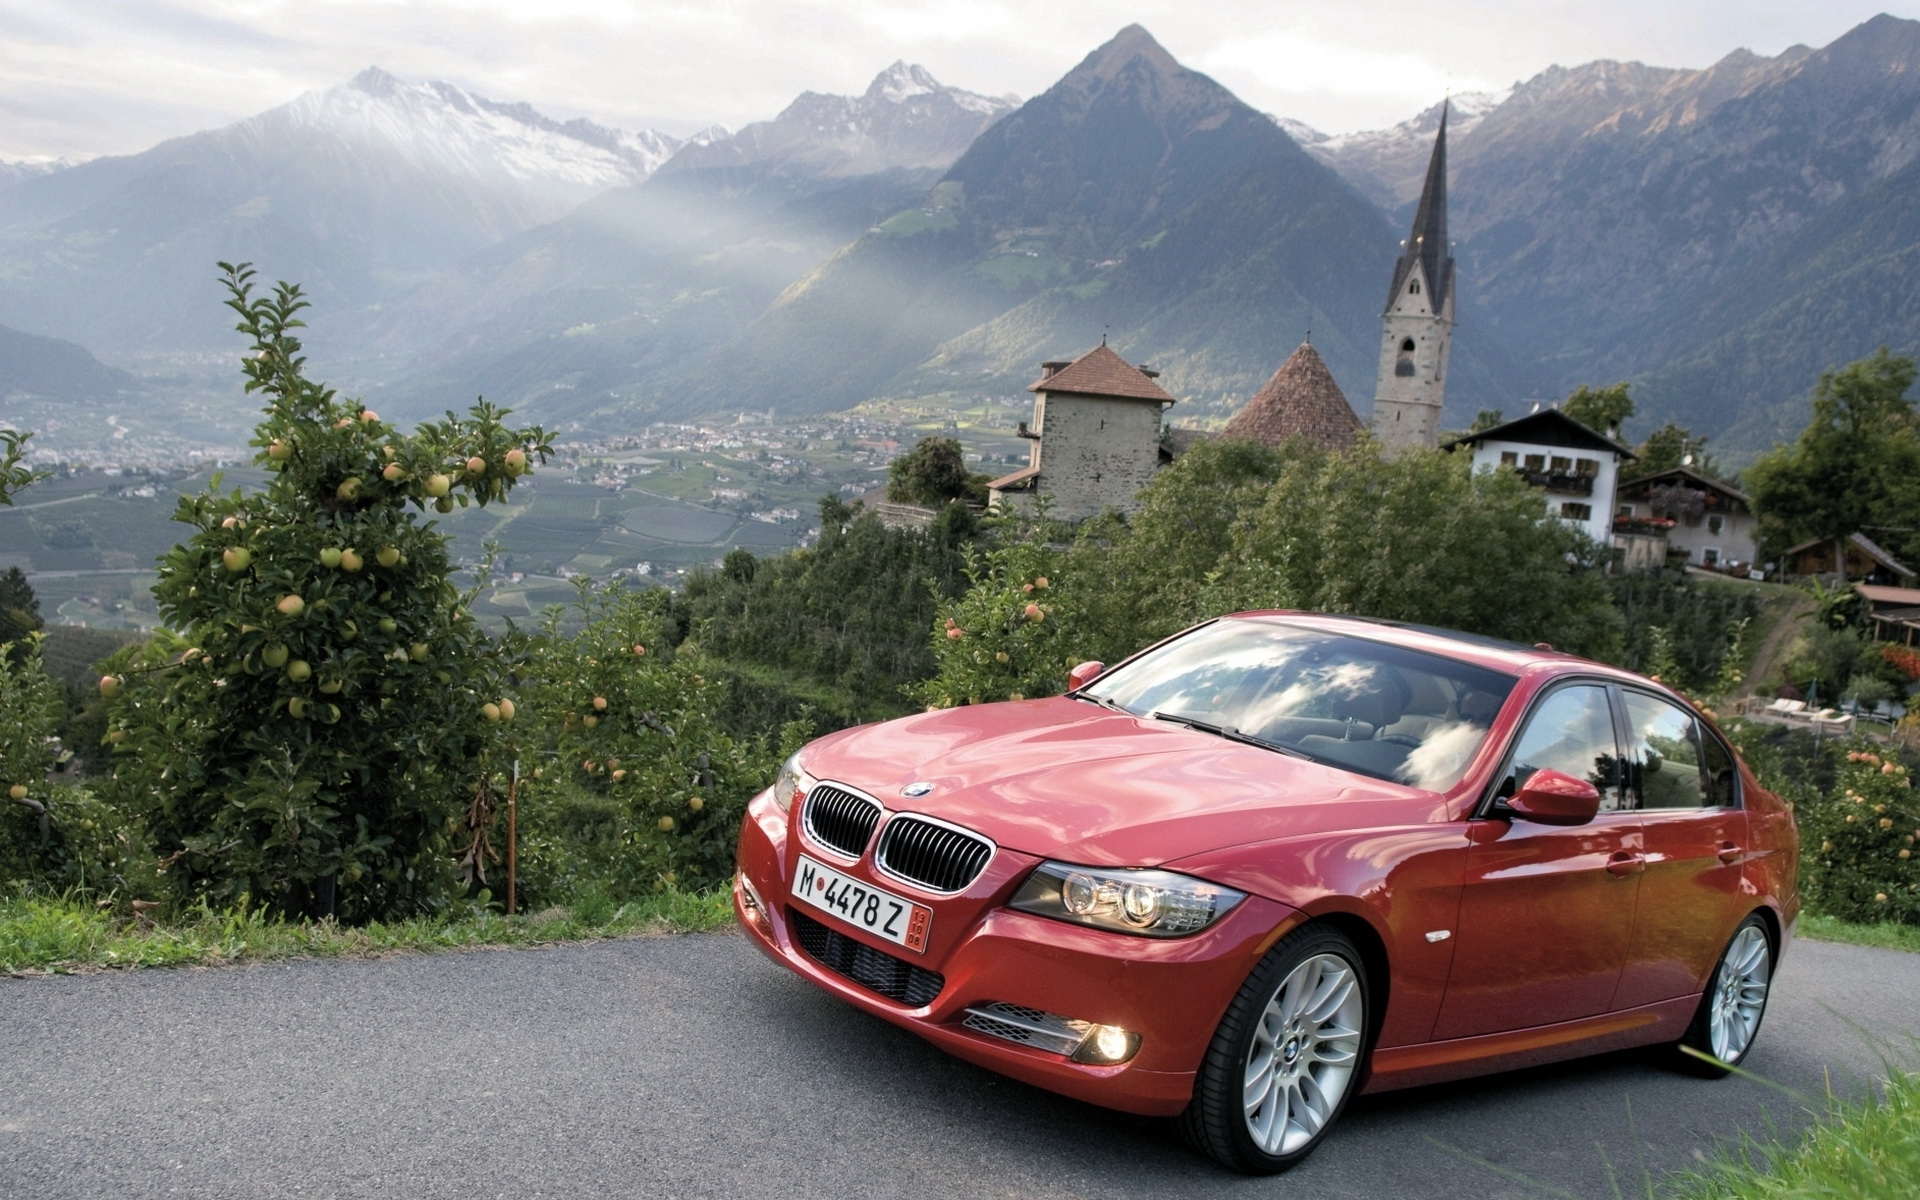 BMW 325i wallpaper and image, picture, photo